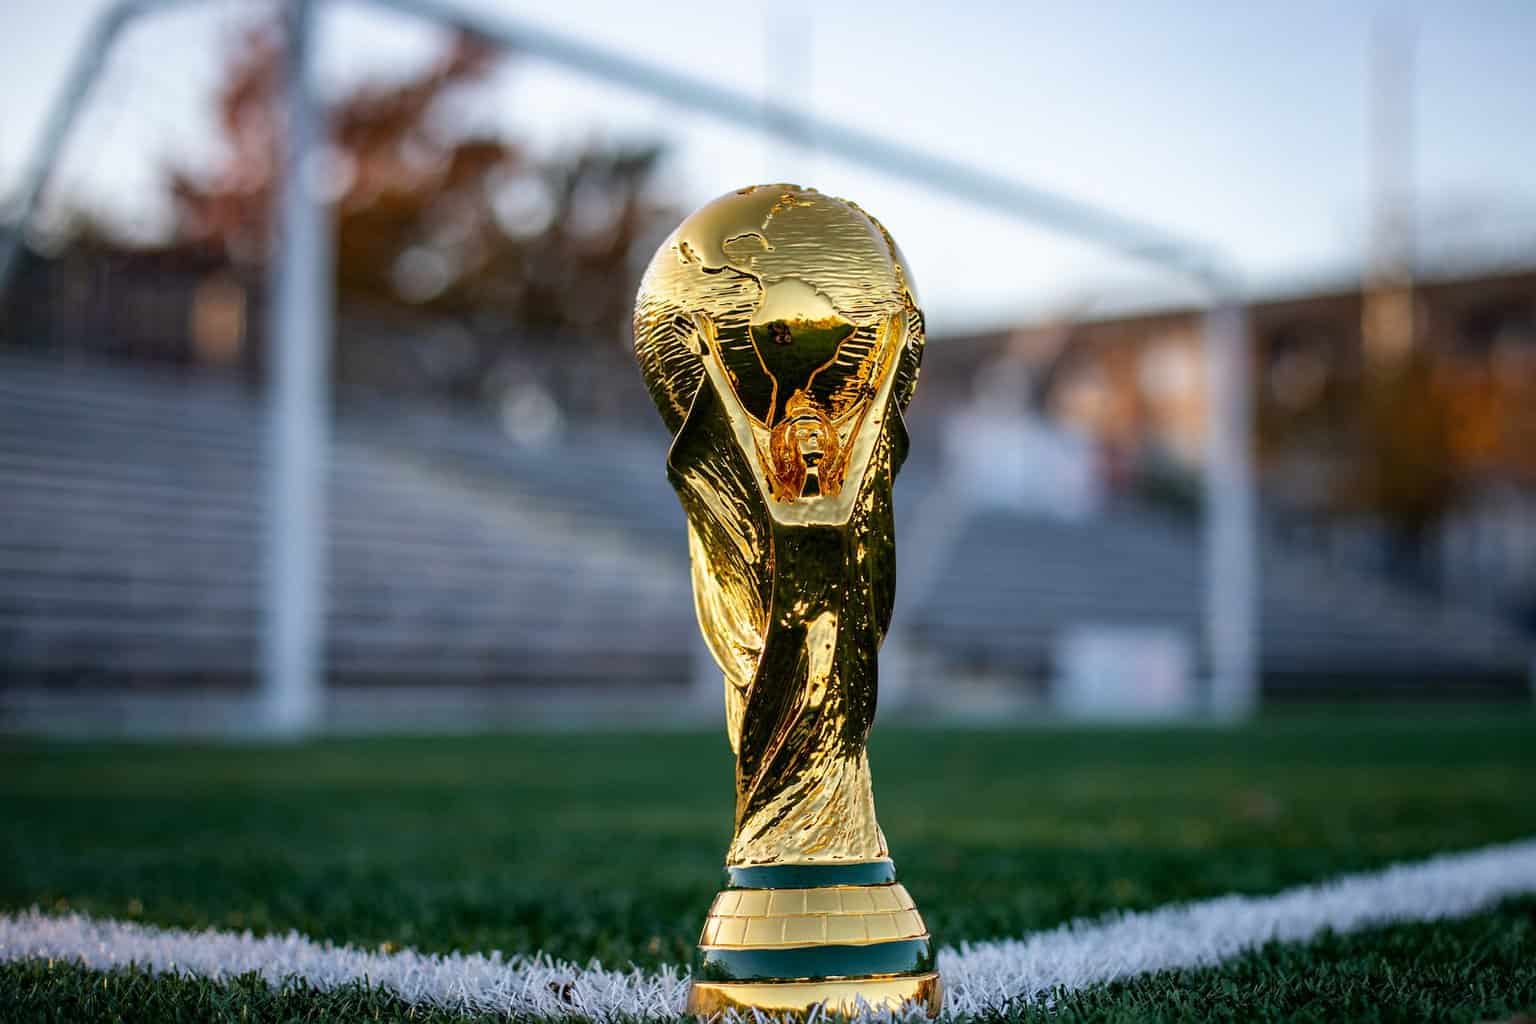 FIFA 2018: 10+ cool FIFA facts every World Cup football fan should know